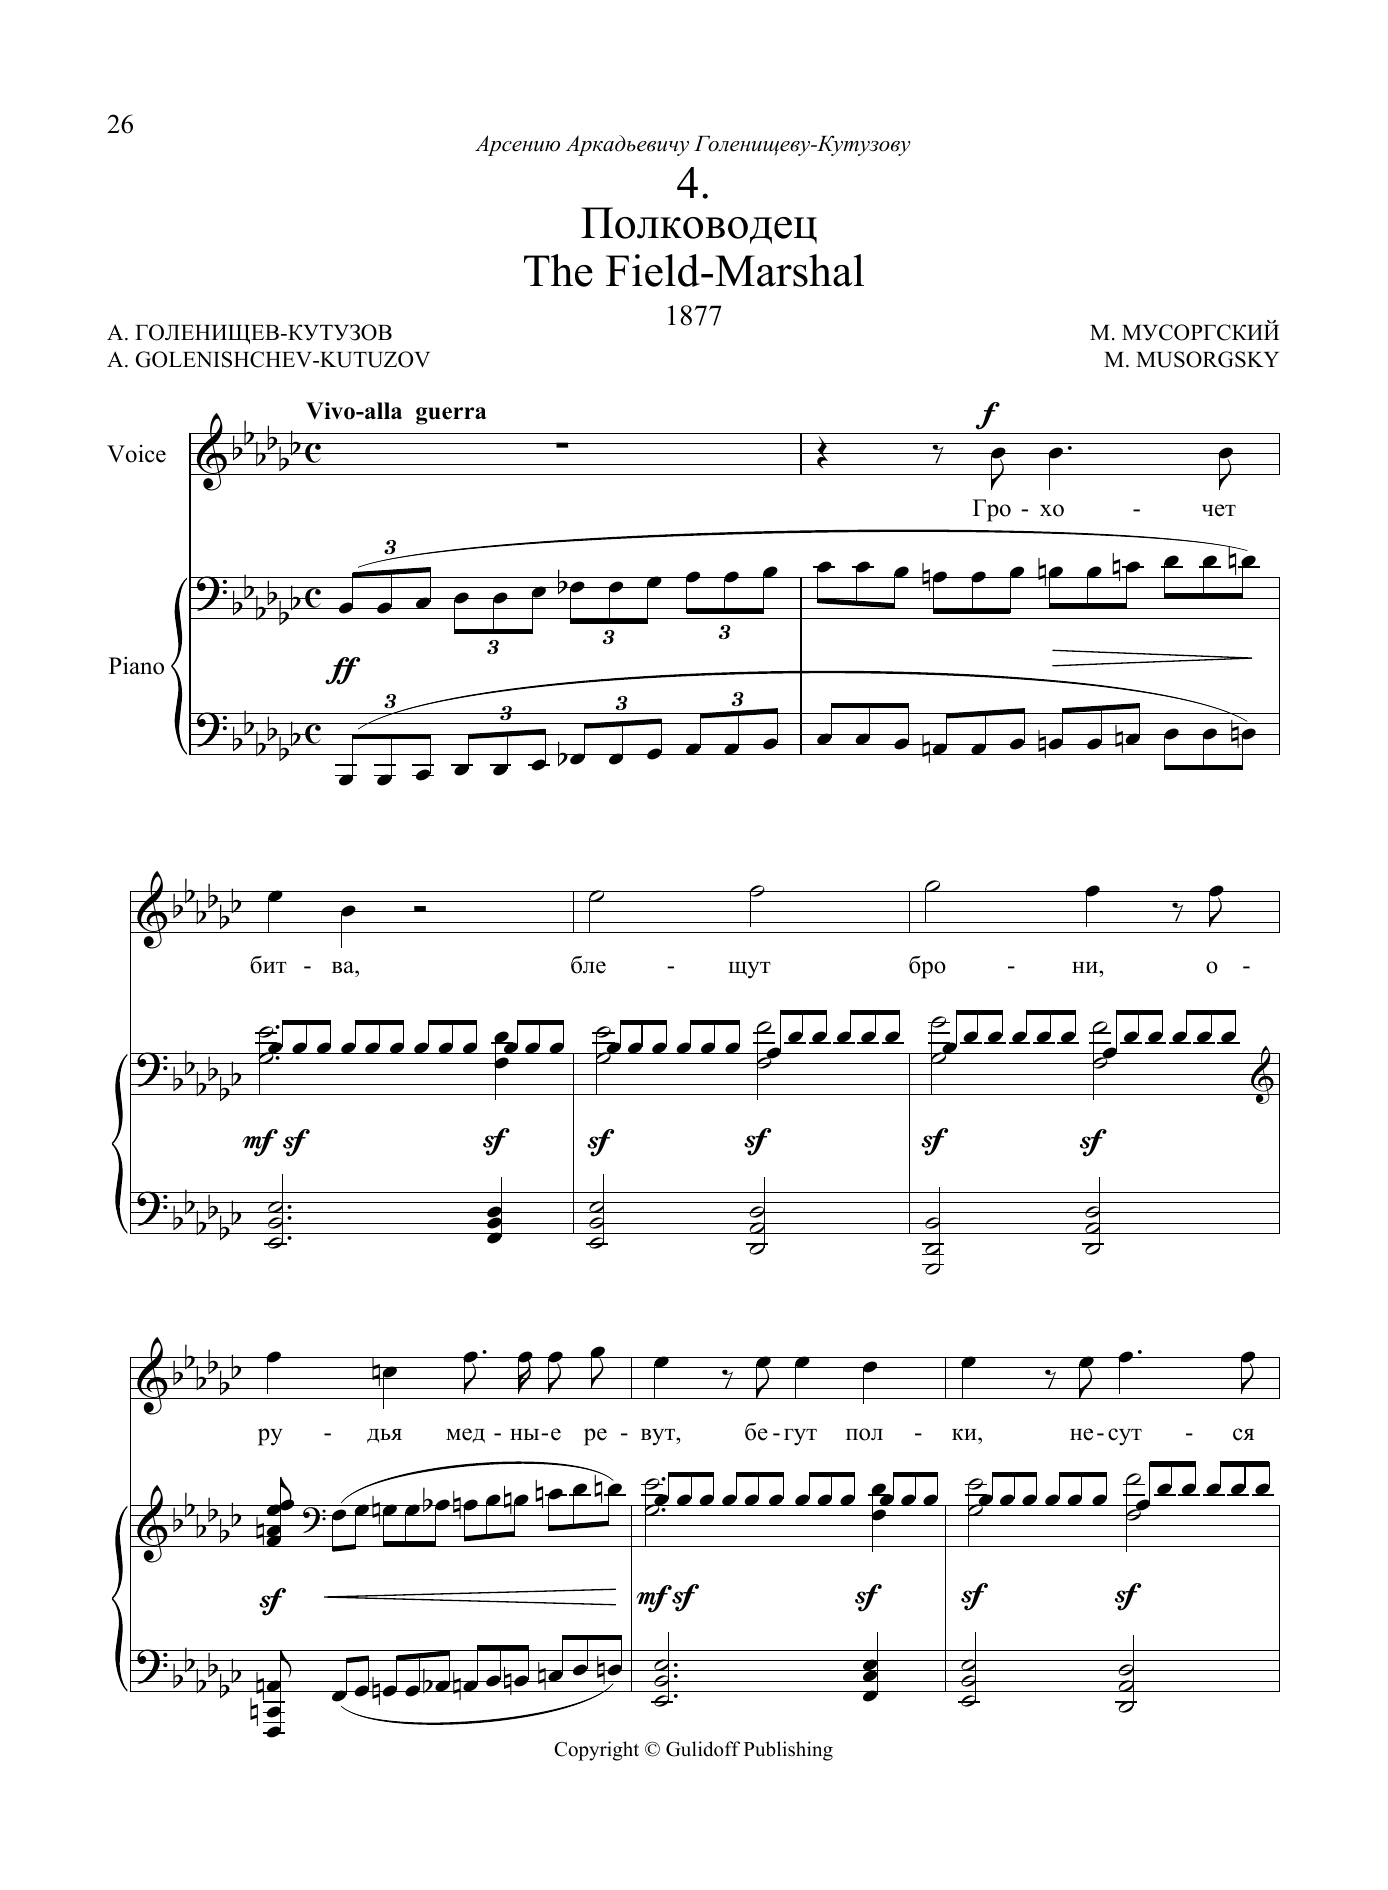 Download Modest Petrovich Mussorgsky The Field Marshal, No. 4 from Four Song Sheet Music